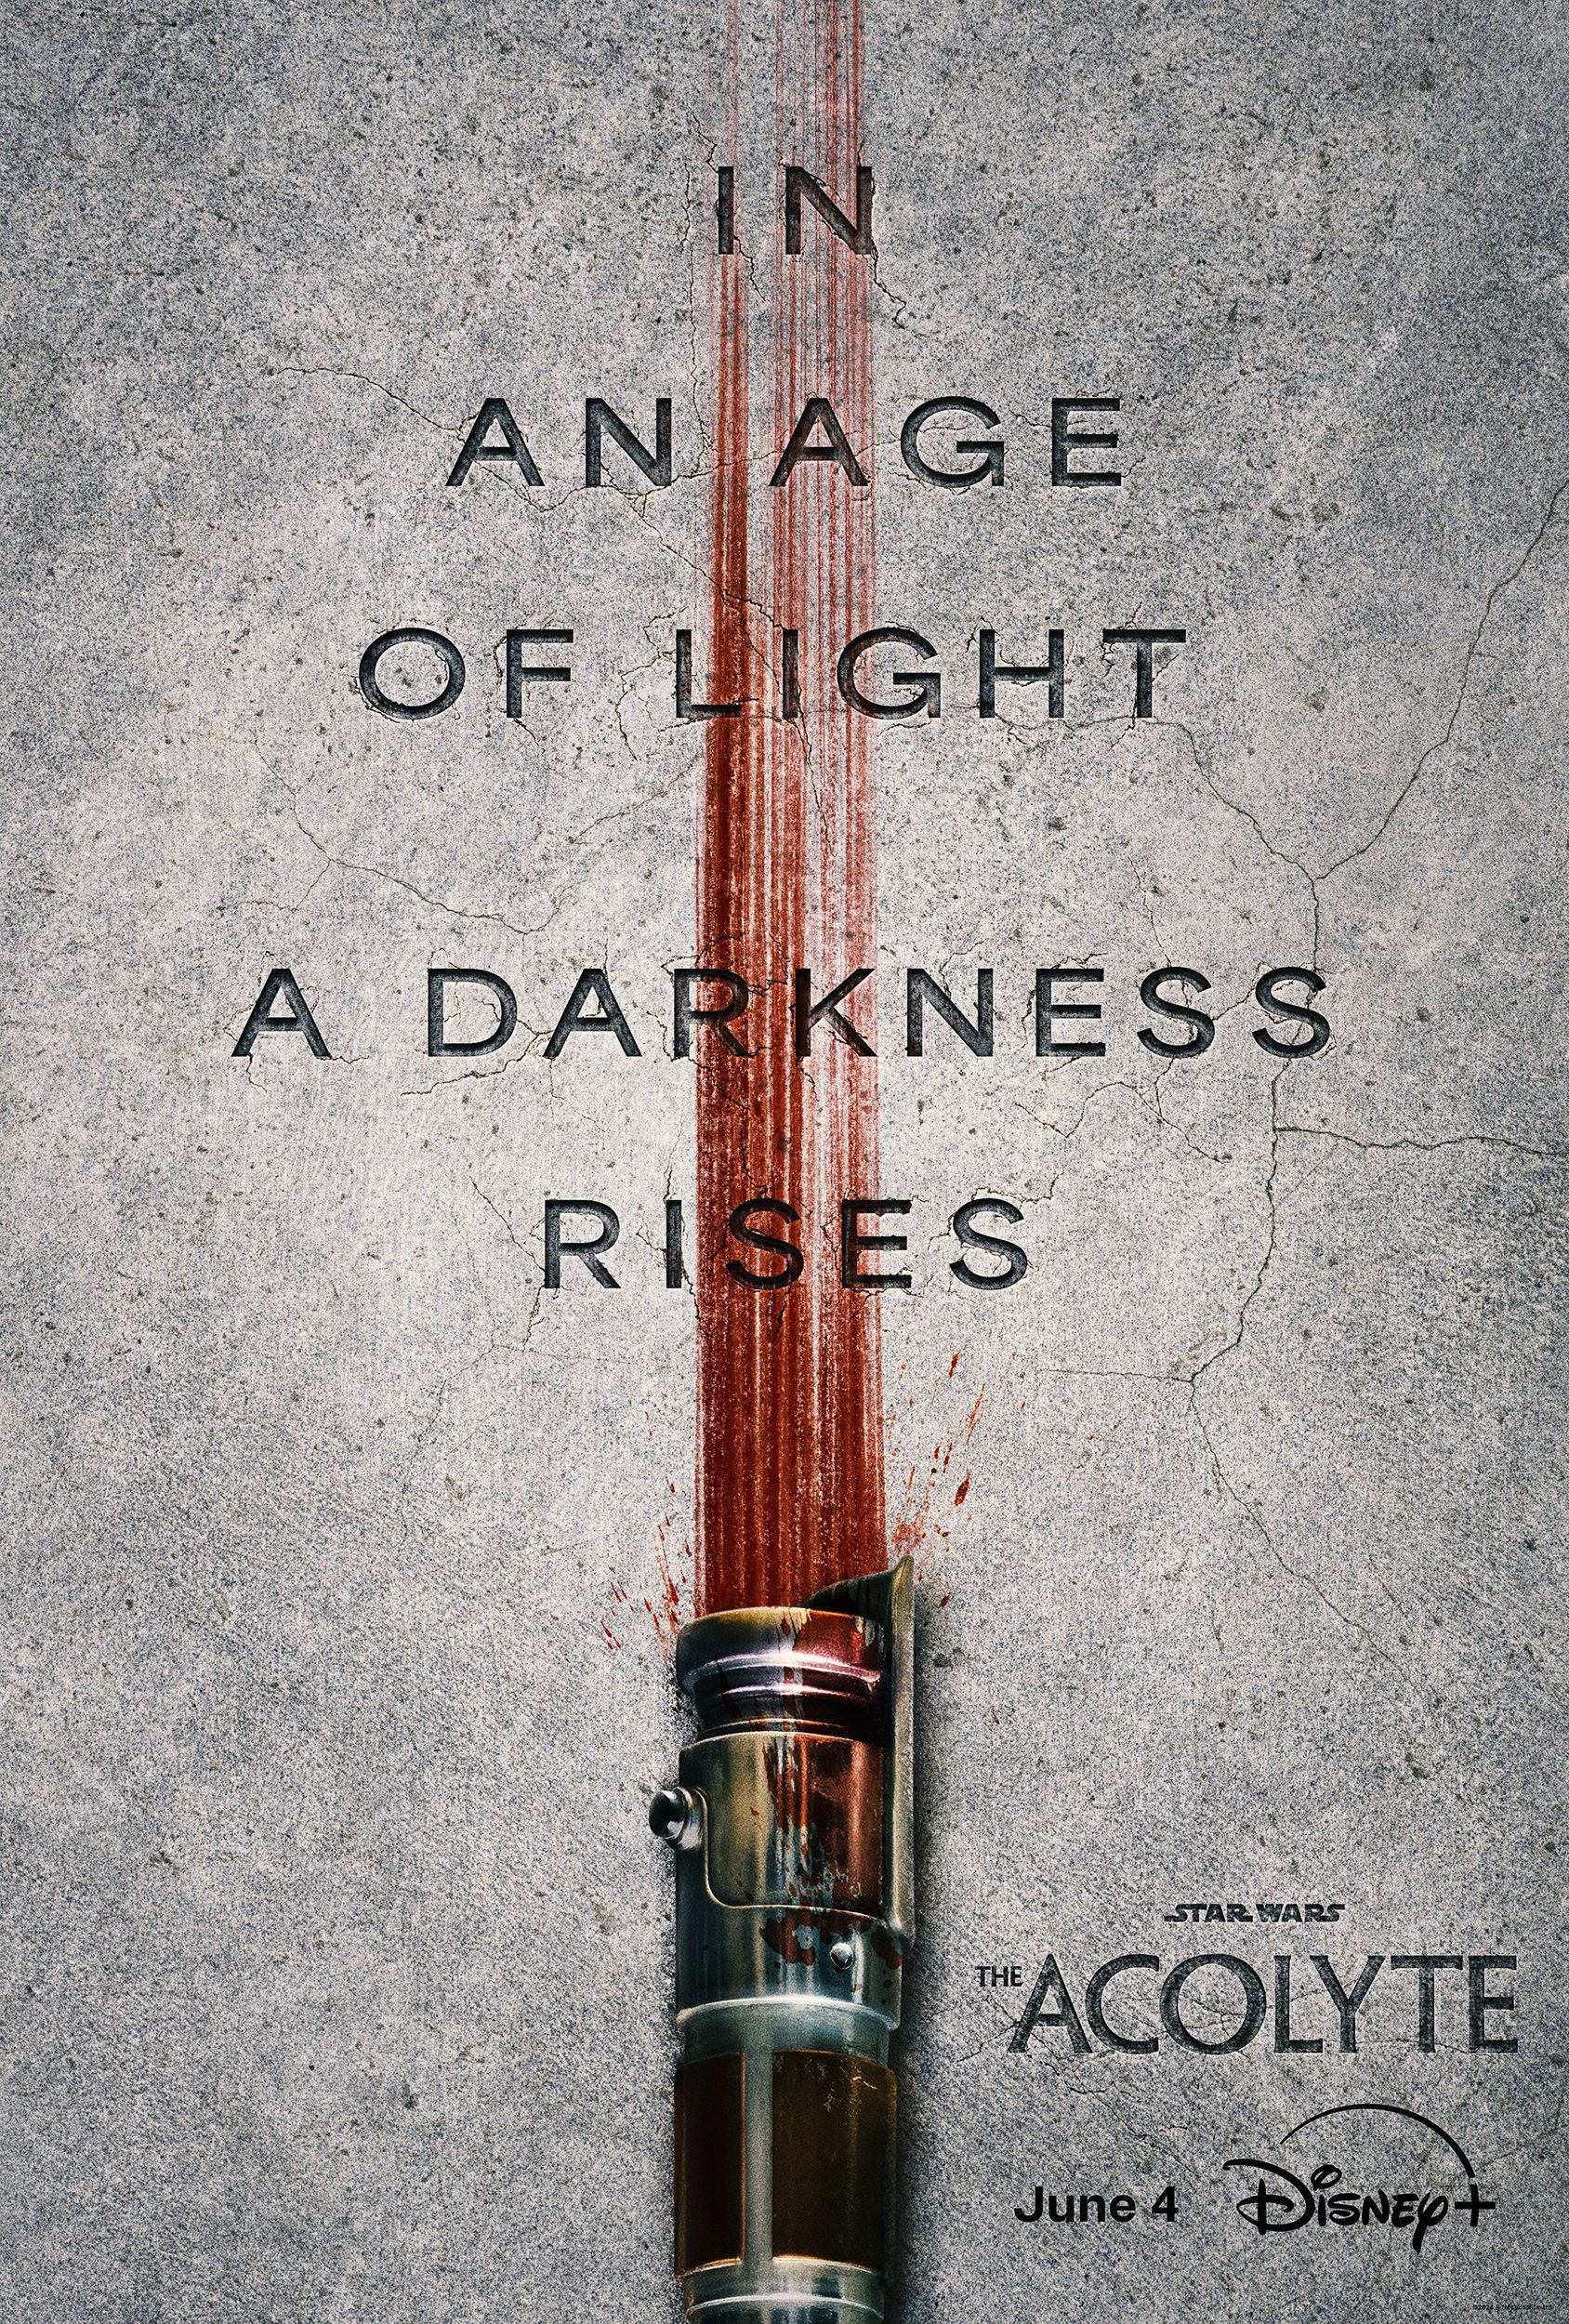 Star Wars The Acolyte TV Show Poster Showing a Lightsaber on the Ground with a Blood Spear Resembling the Blade